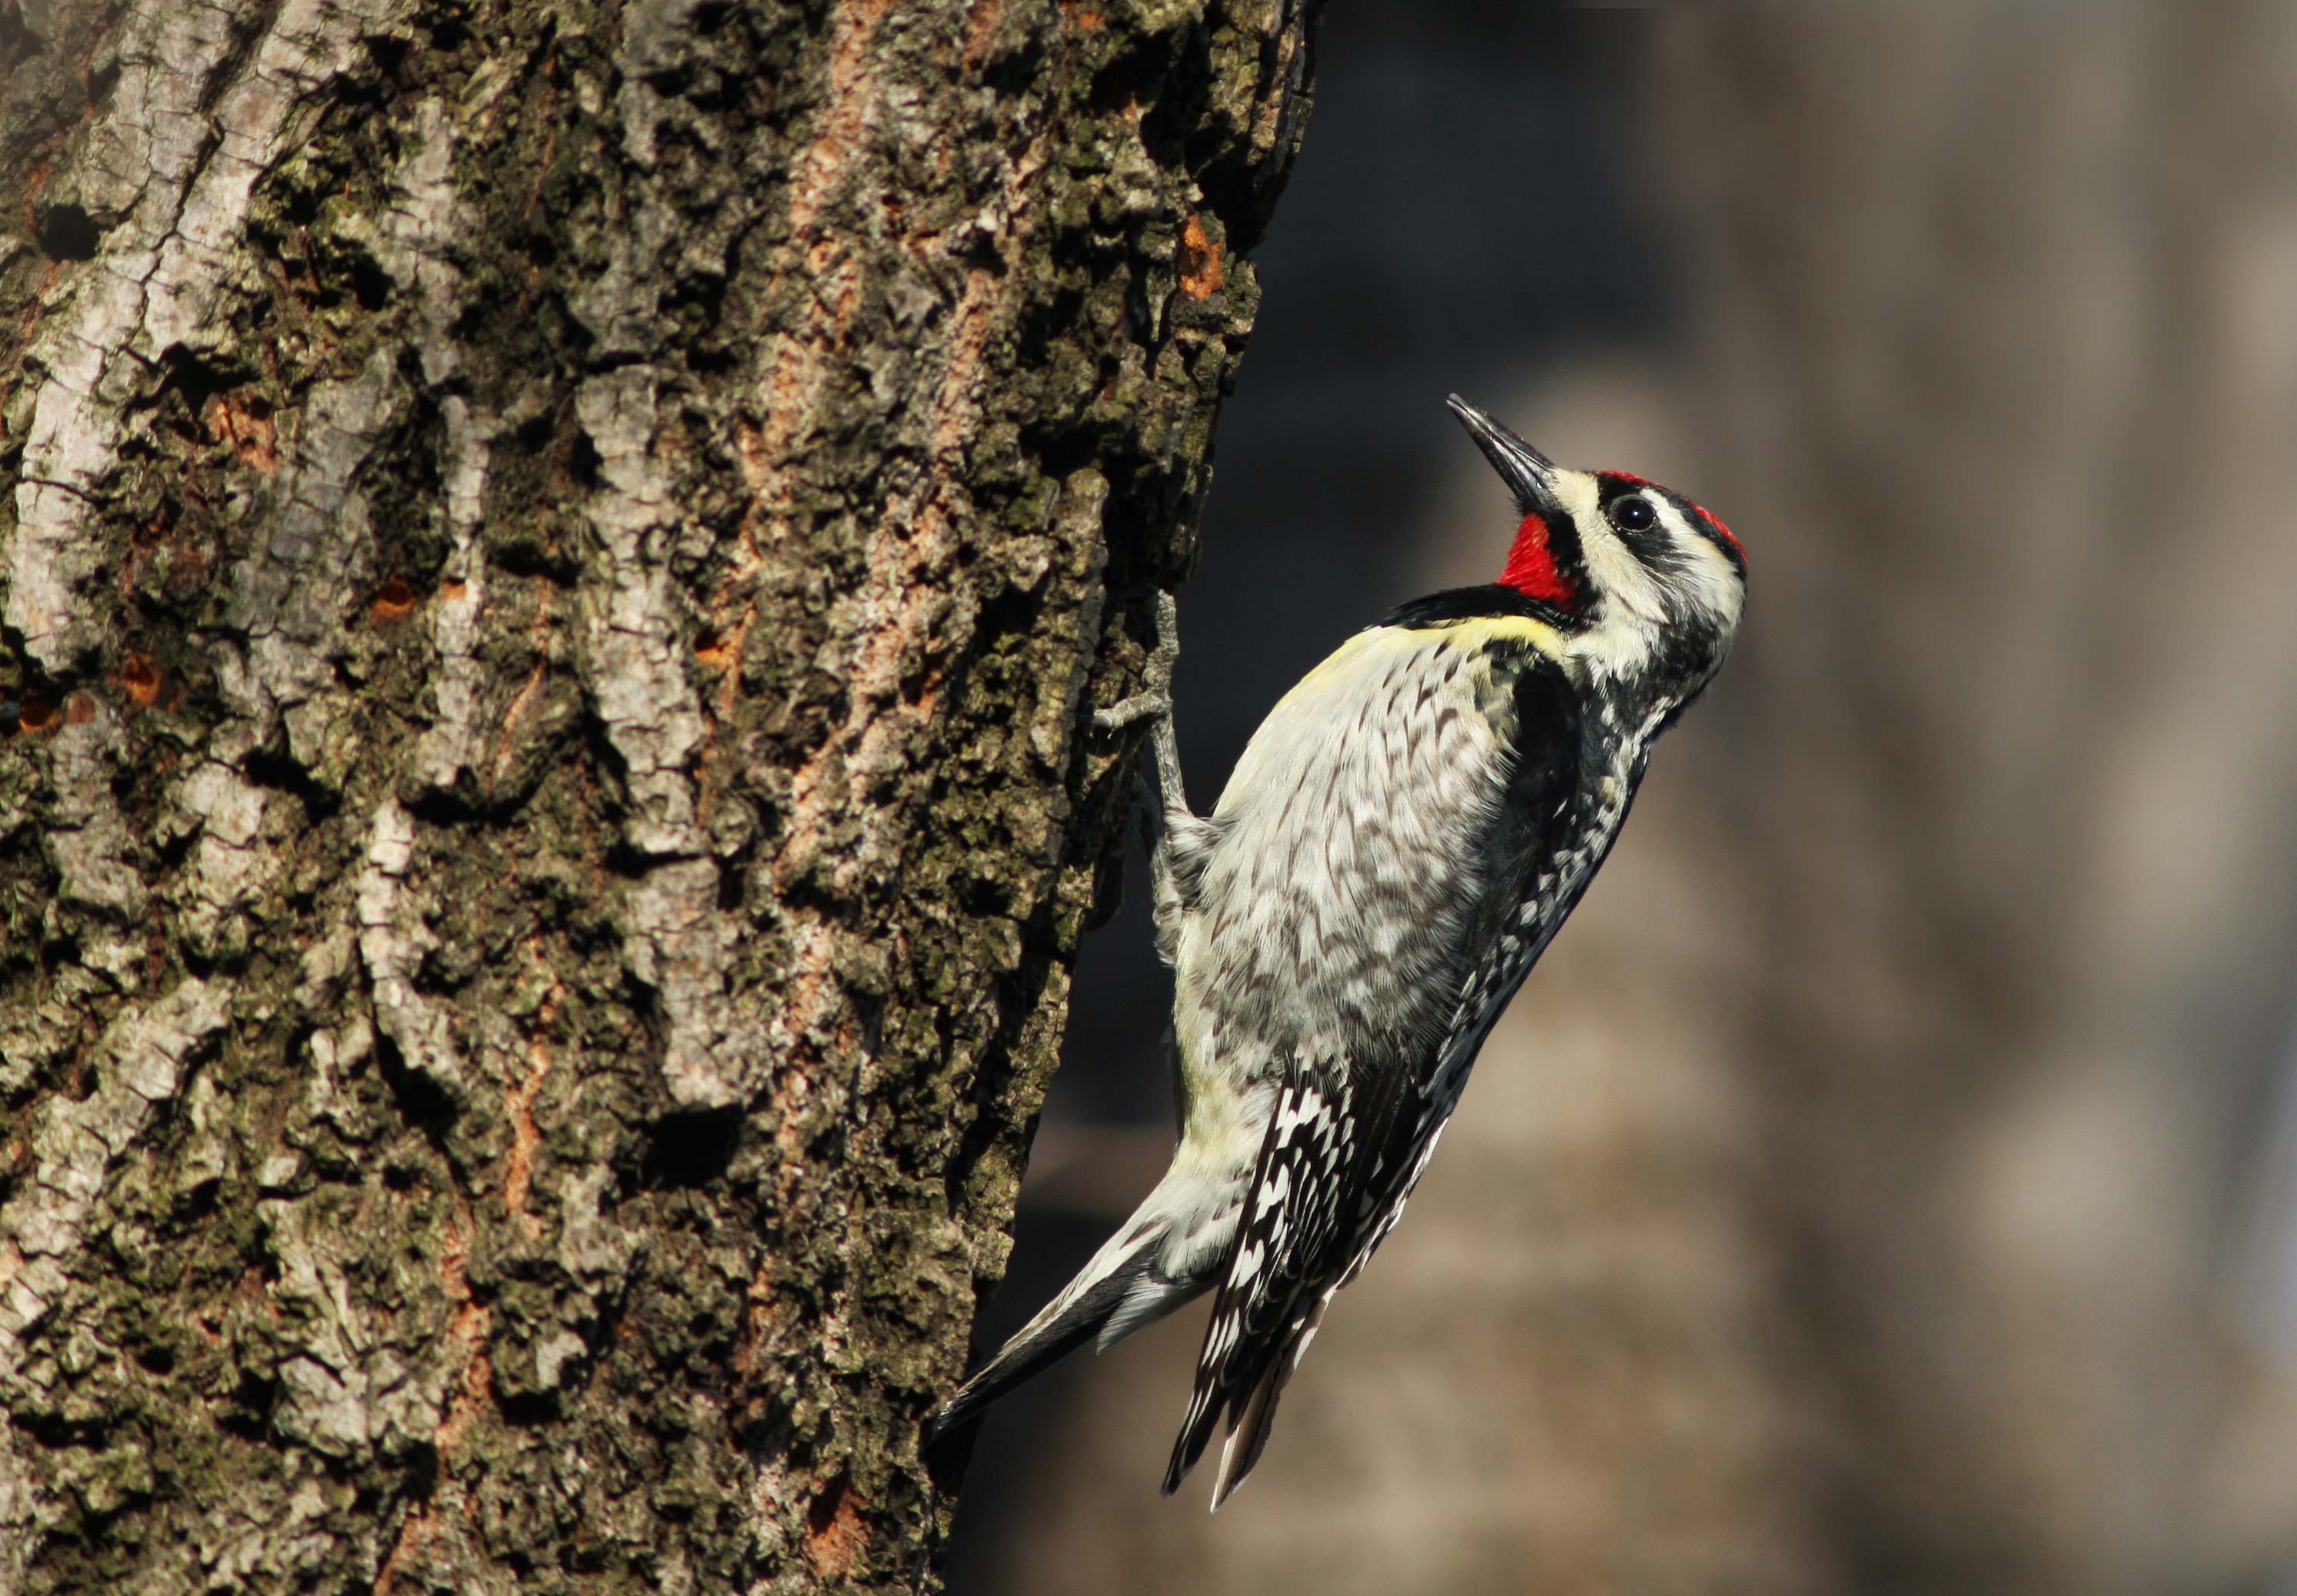 A yellow-bellied sapsucker pecks at a tree